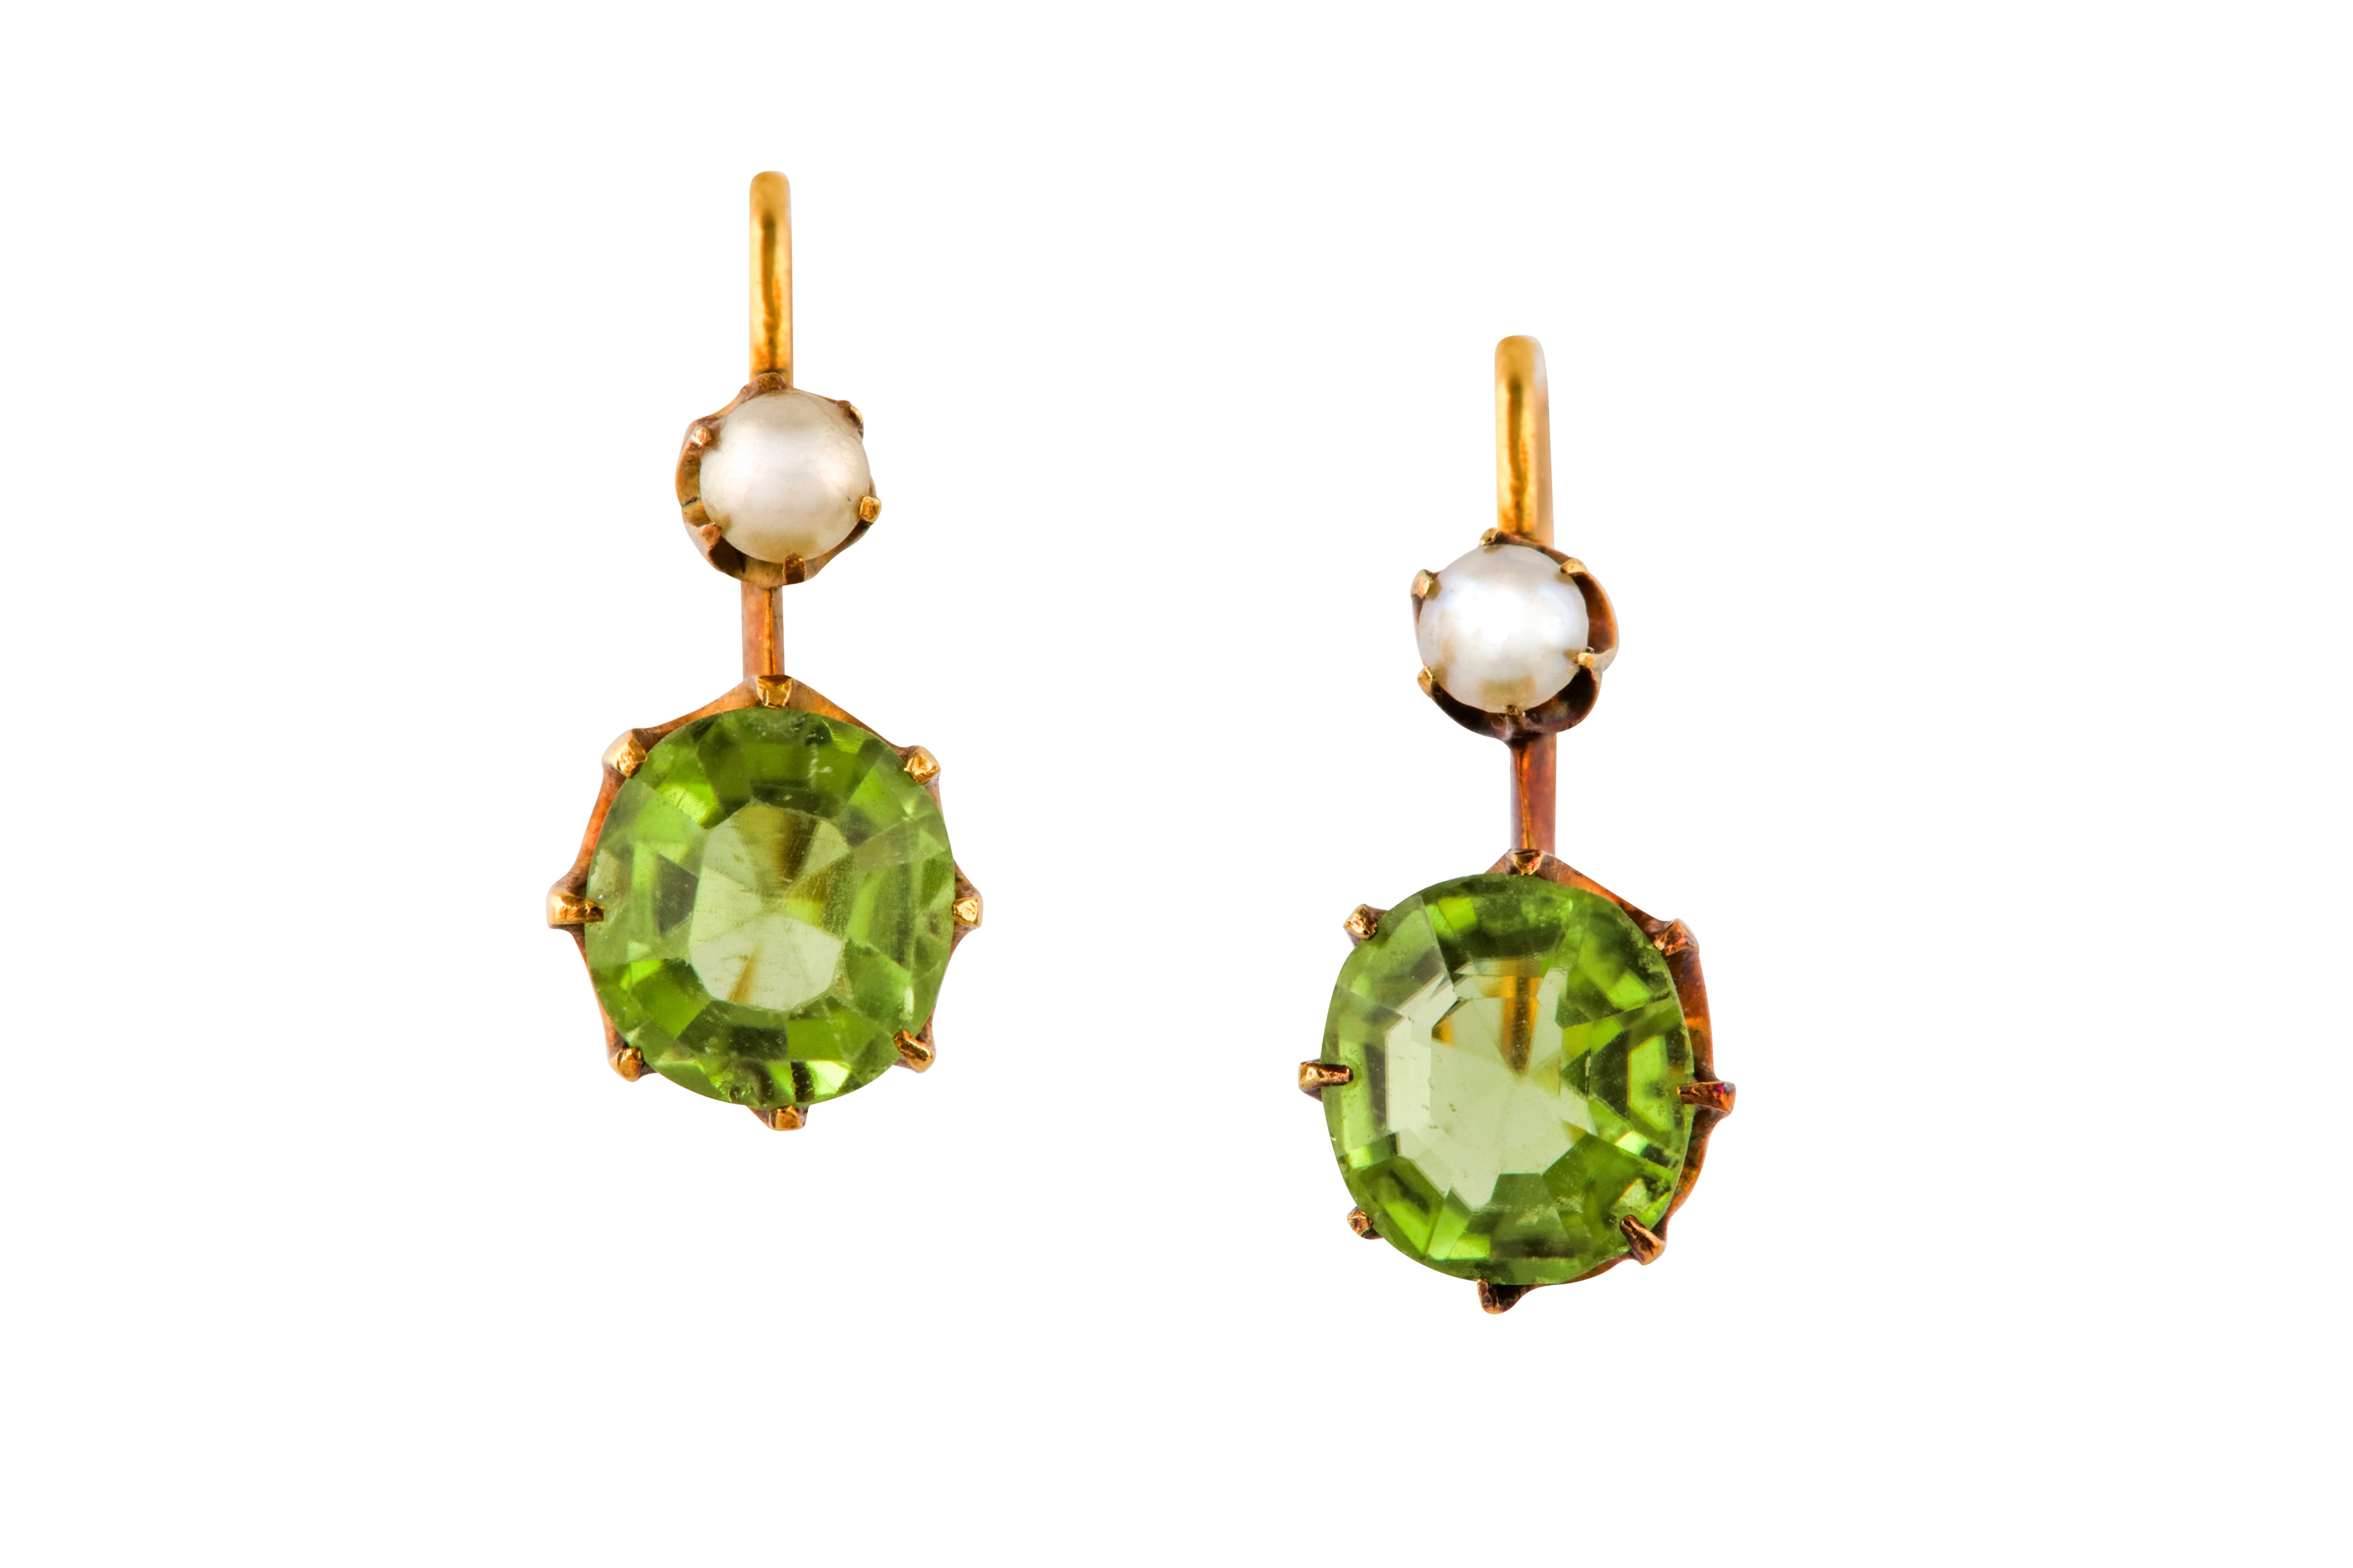 A PERIDOT AND SEED PEARL NECKLACE AND EARRING SUITE - Image 3 of 6